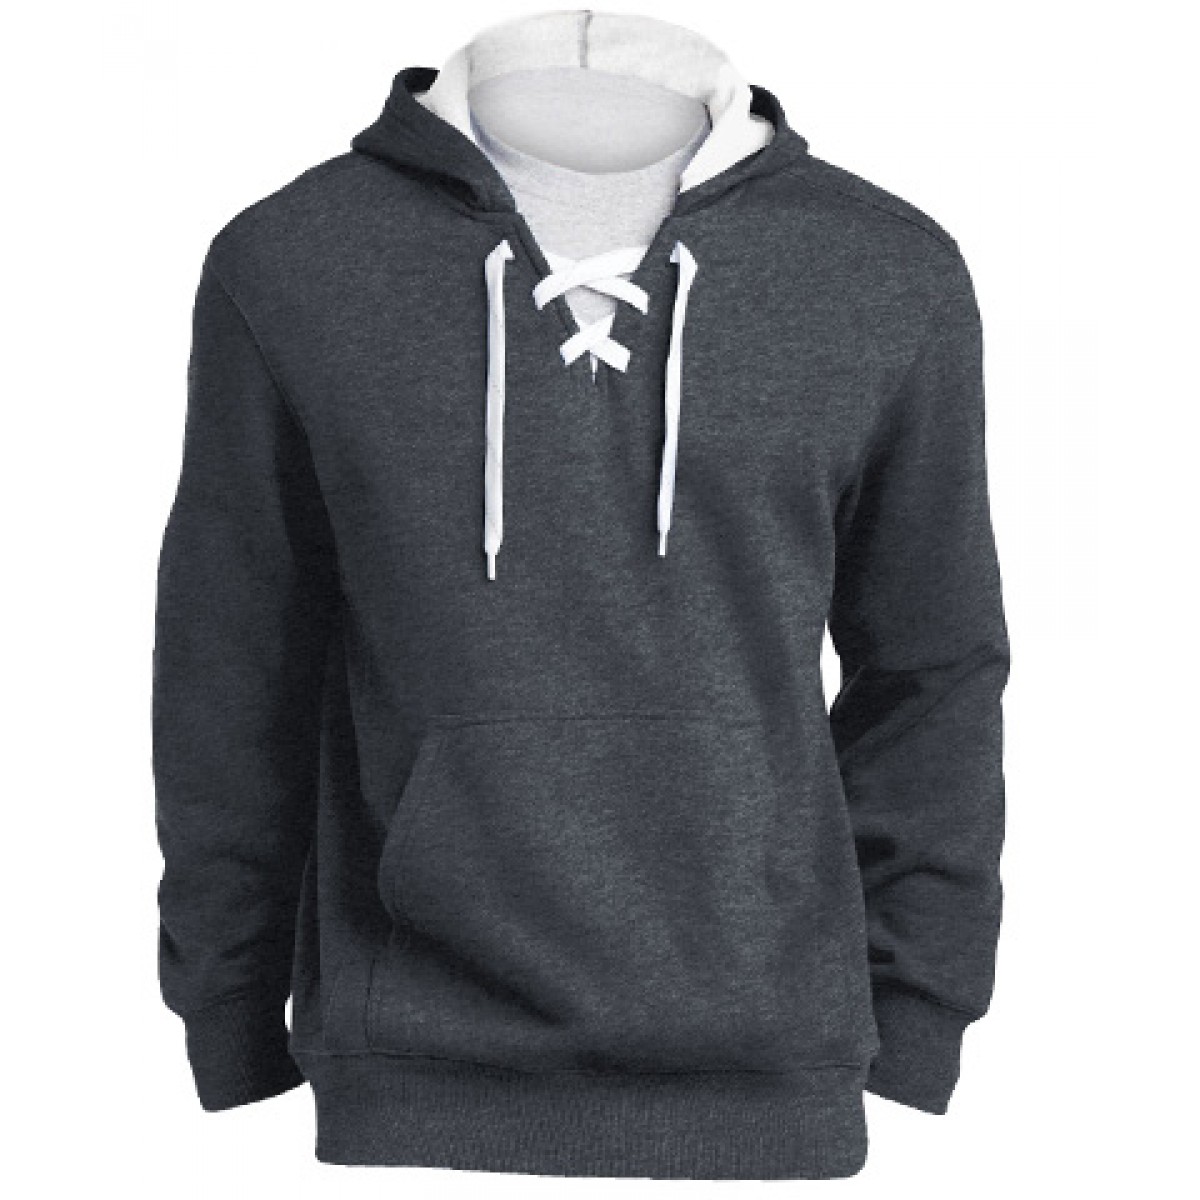 Lace Up Pullover Hooded Sweatshirt-Charocal-XL